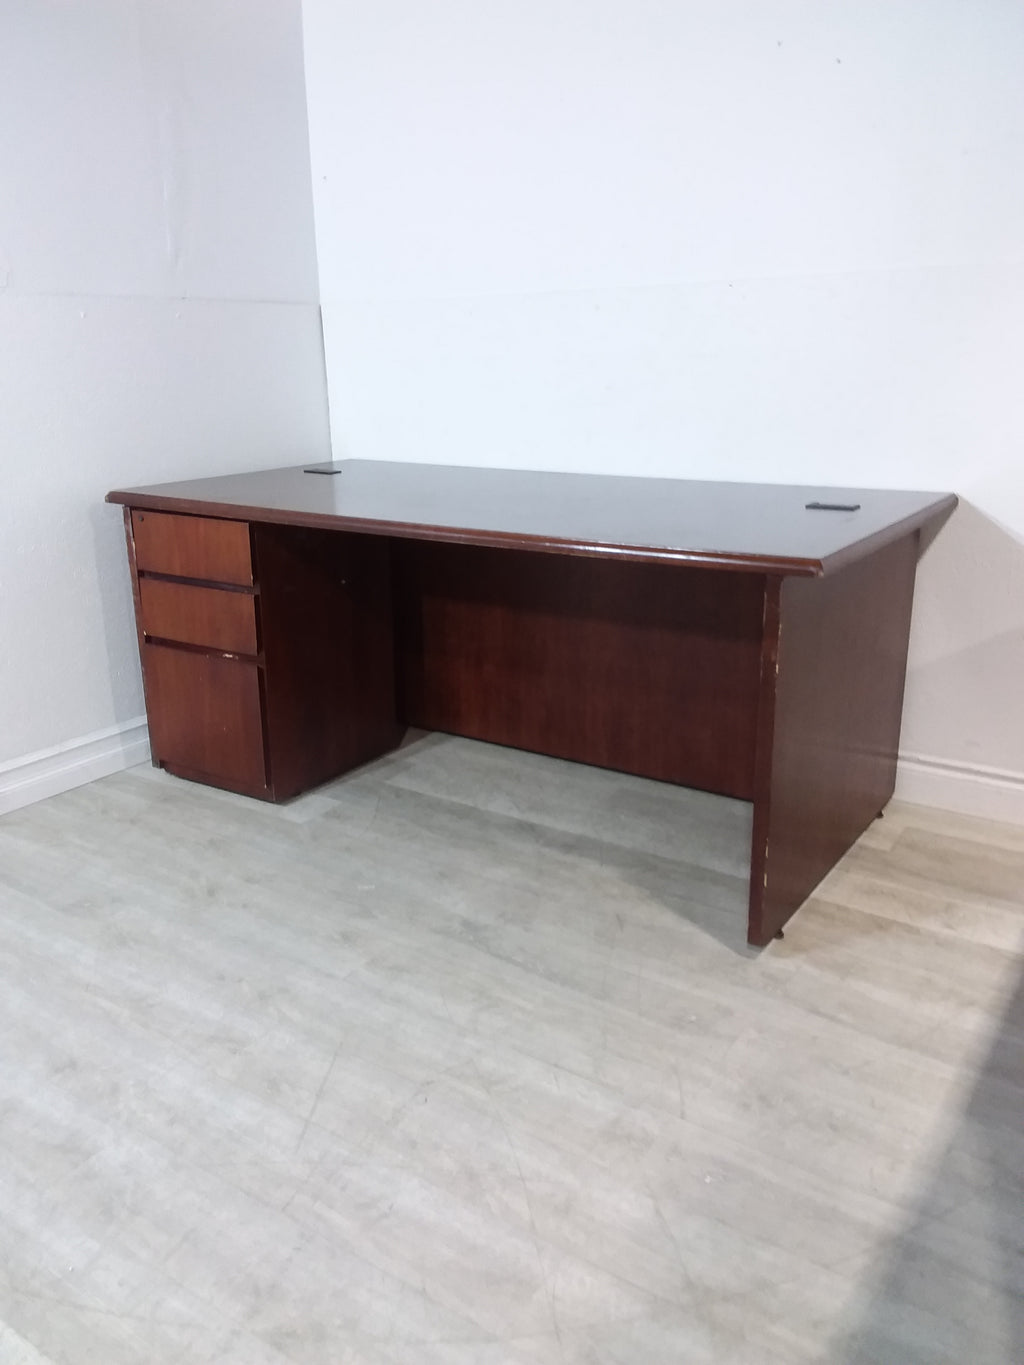 72" Wide Desk With Small Filing Cabinet